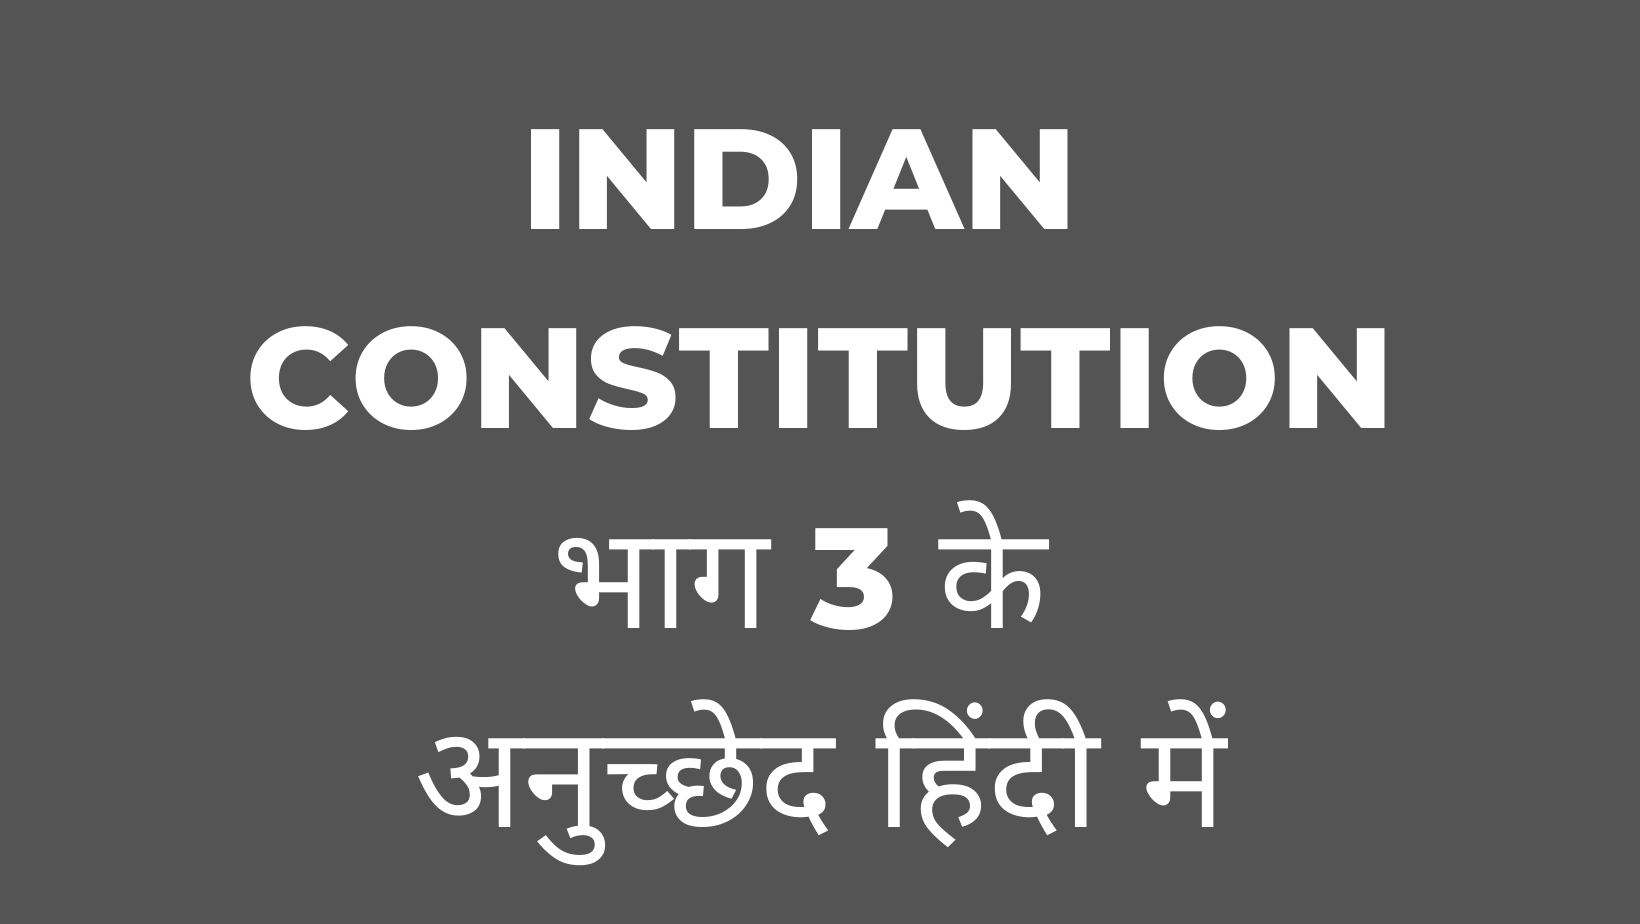 INDIAN CONSTITUTION PART 3 ARTICLE